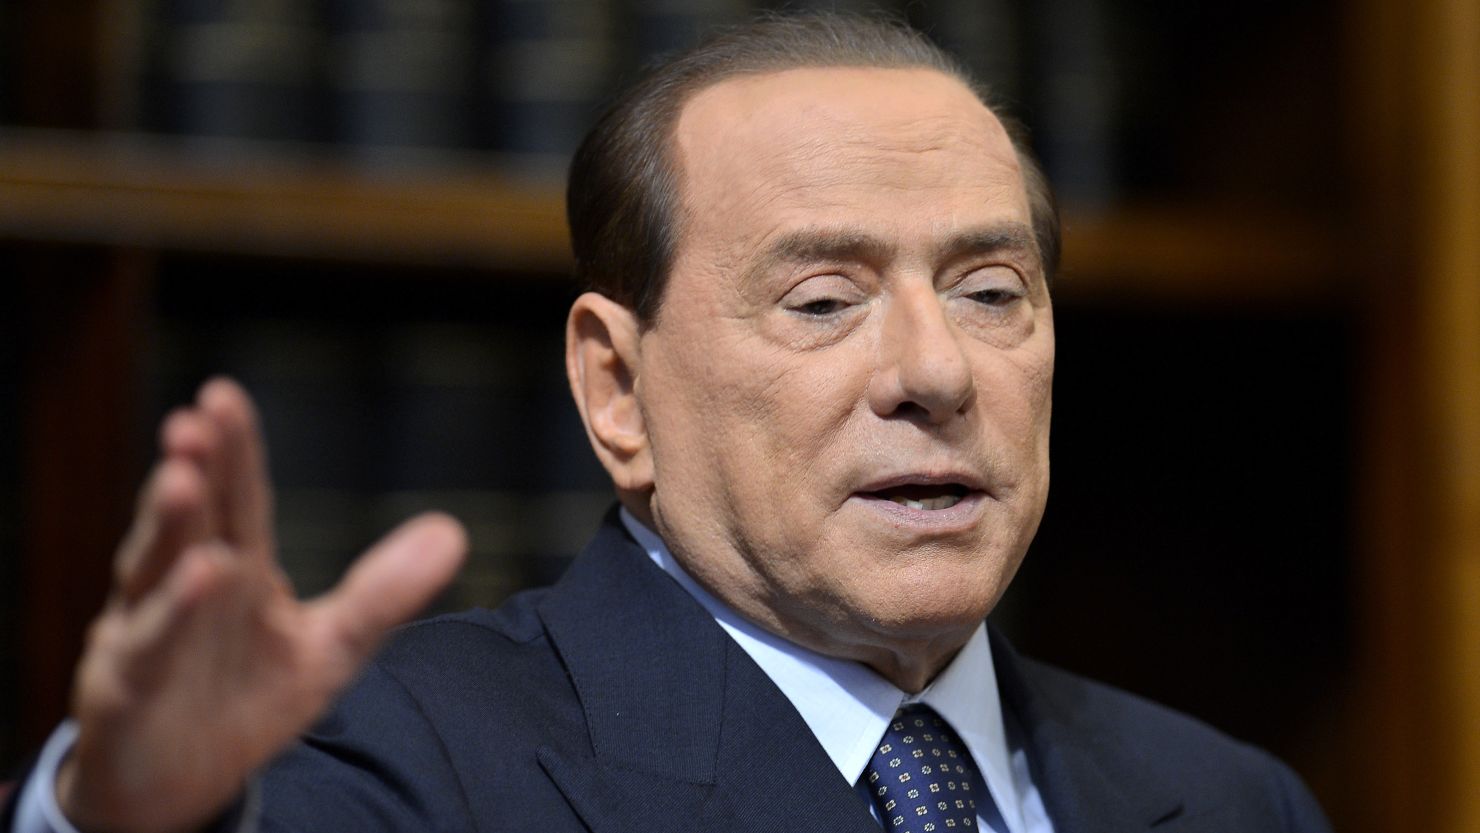 (File photo) Former Italian Prime Minister Silvio Berlusconi speaks during a press conference on May 25, 2012 in Rome.